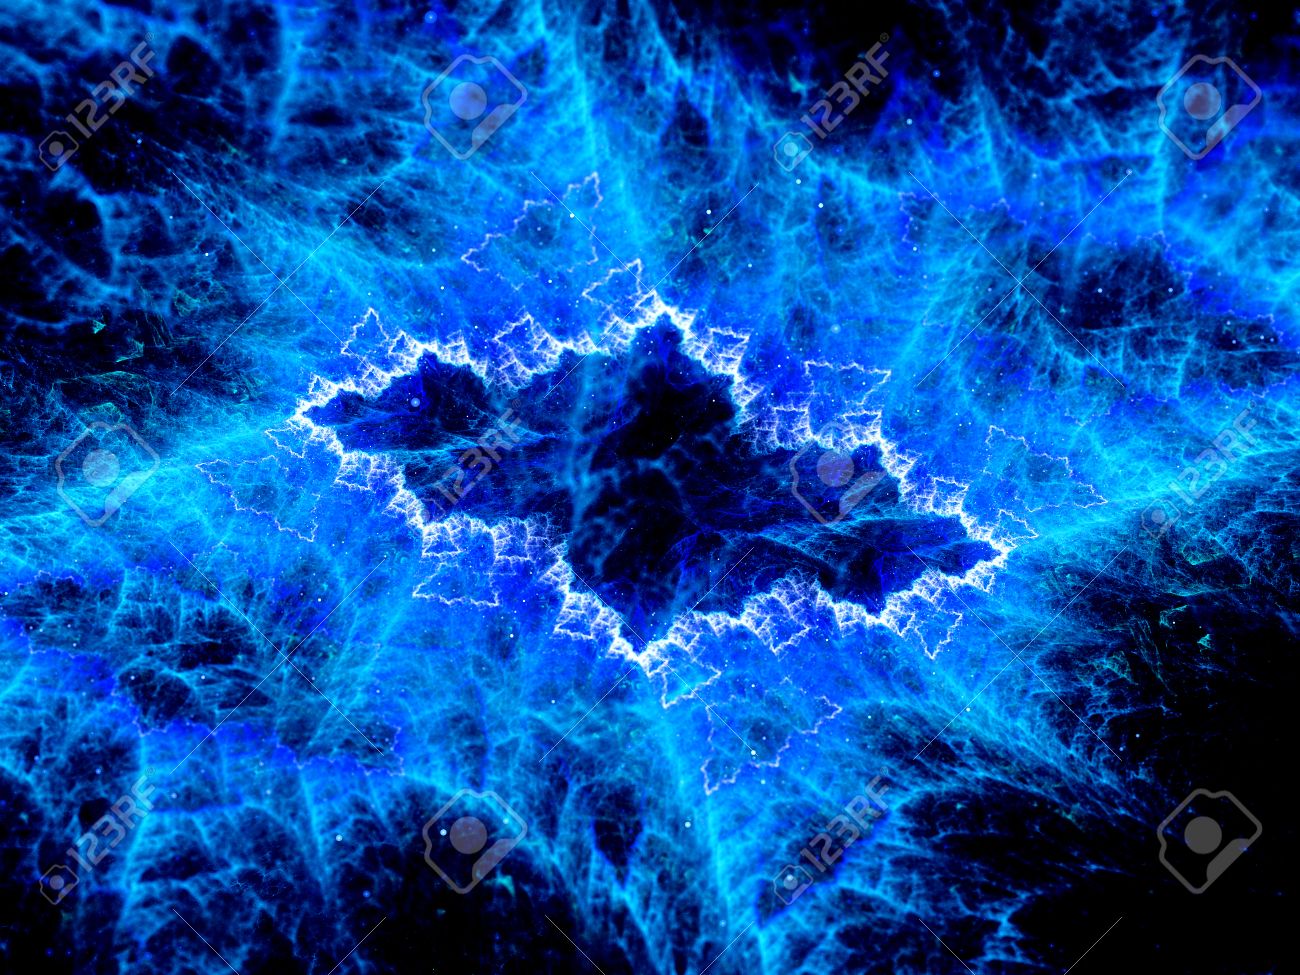 Dark Energy And Antimatter In Space Puter Generated Abstract